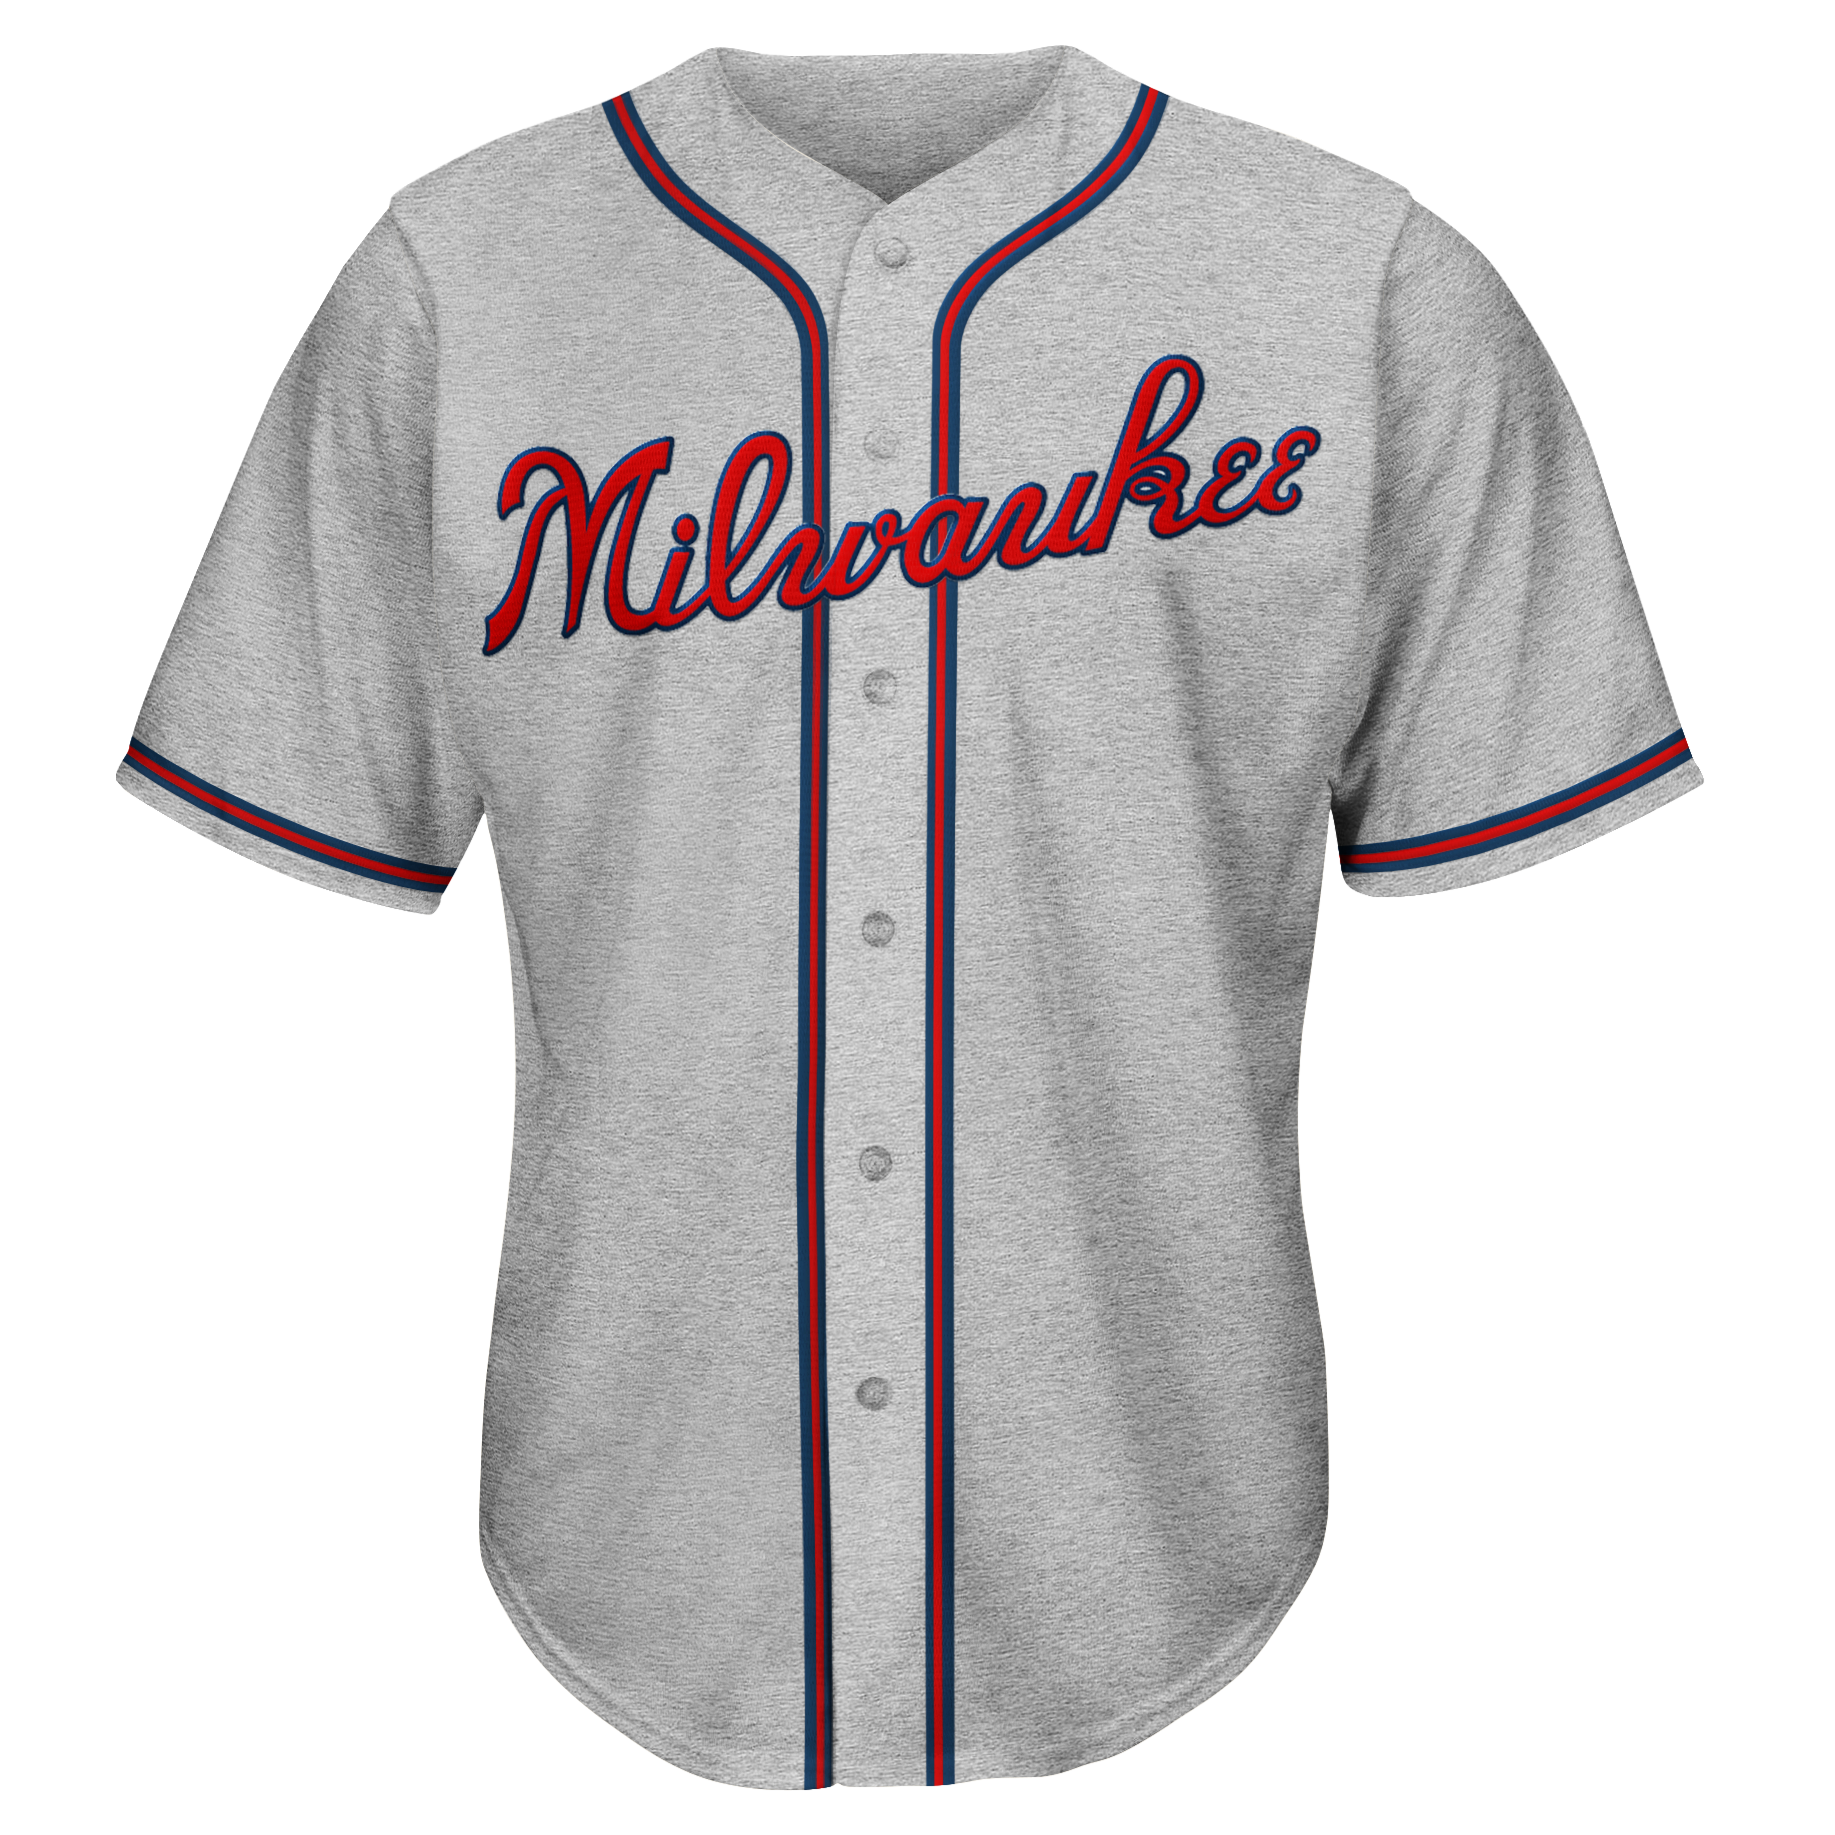 brewers gray jersey